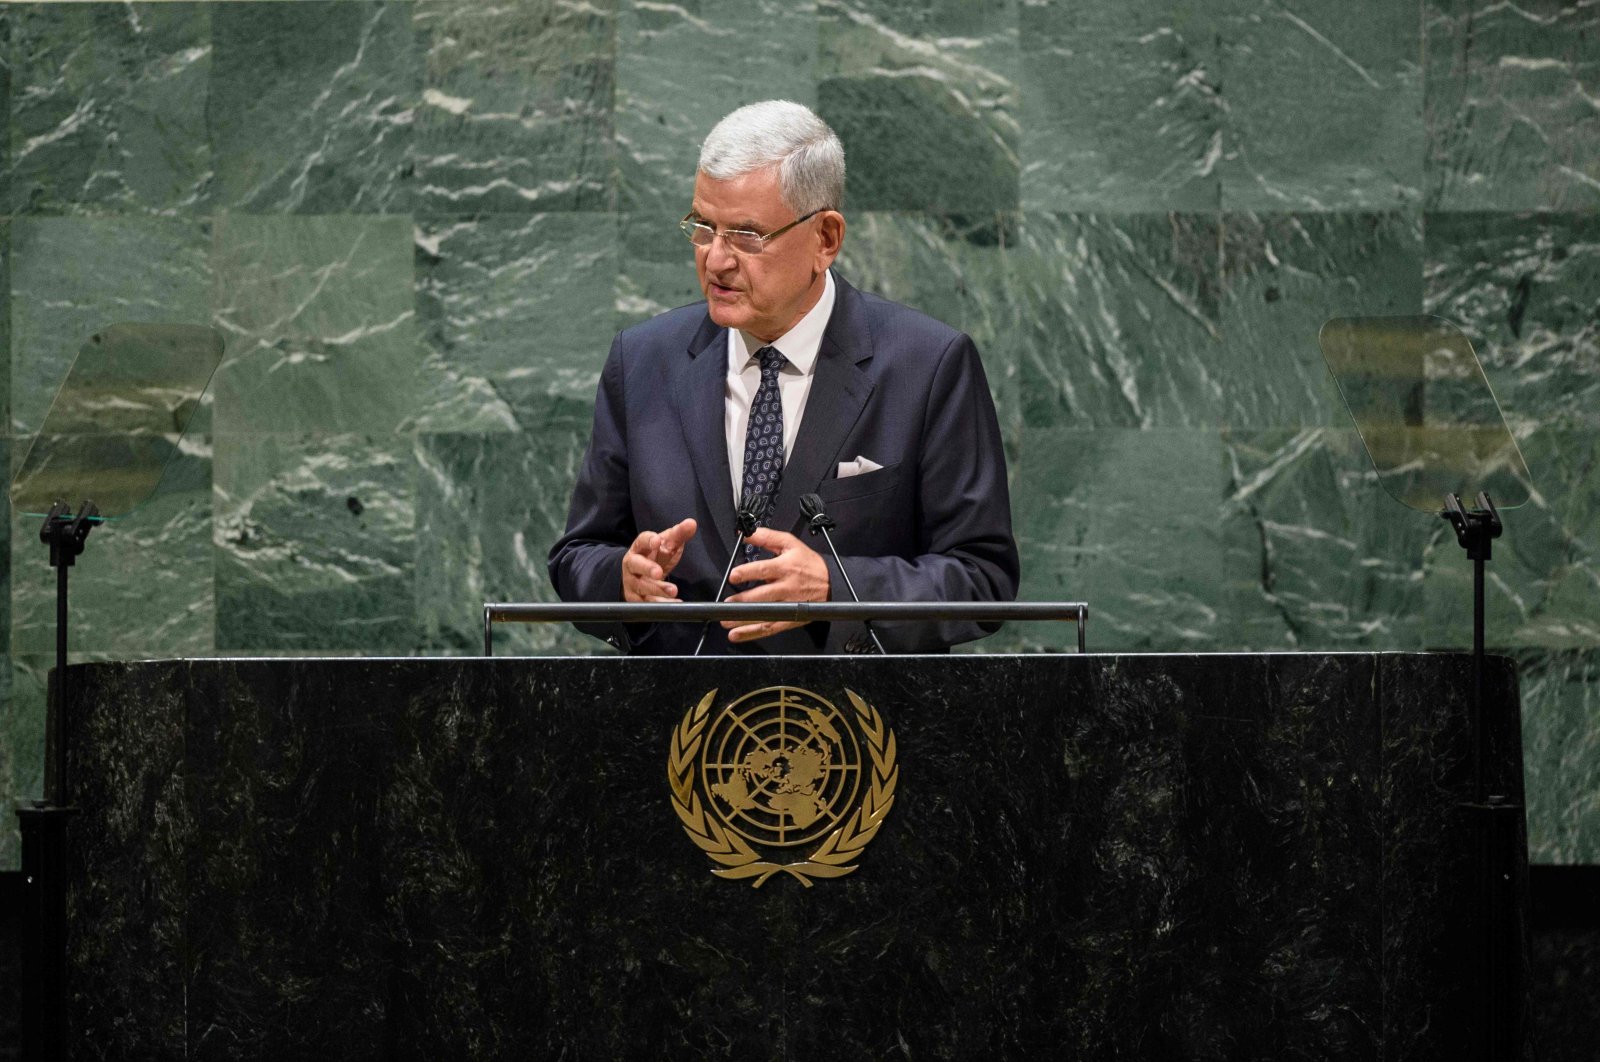 This UN handout photo shows Volkan Bozkır, president of the seventy-fifth session of the United Nations General Assembly, delivers closing remarks to the general debate of the 75th session of the UNGA, on September 29, 2020, in New York. (United Nations / Loey Felipe via AFP)